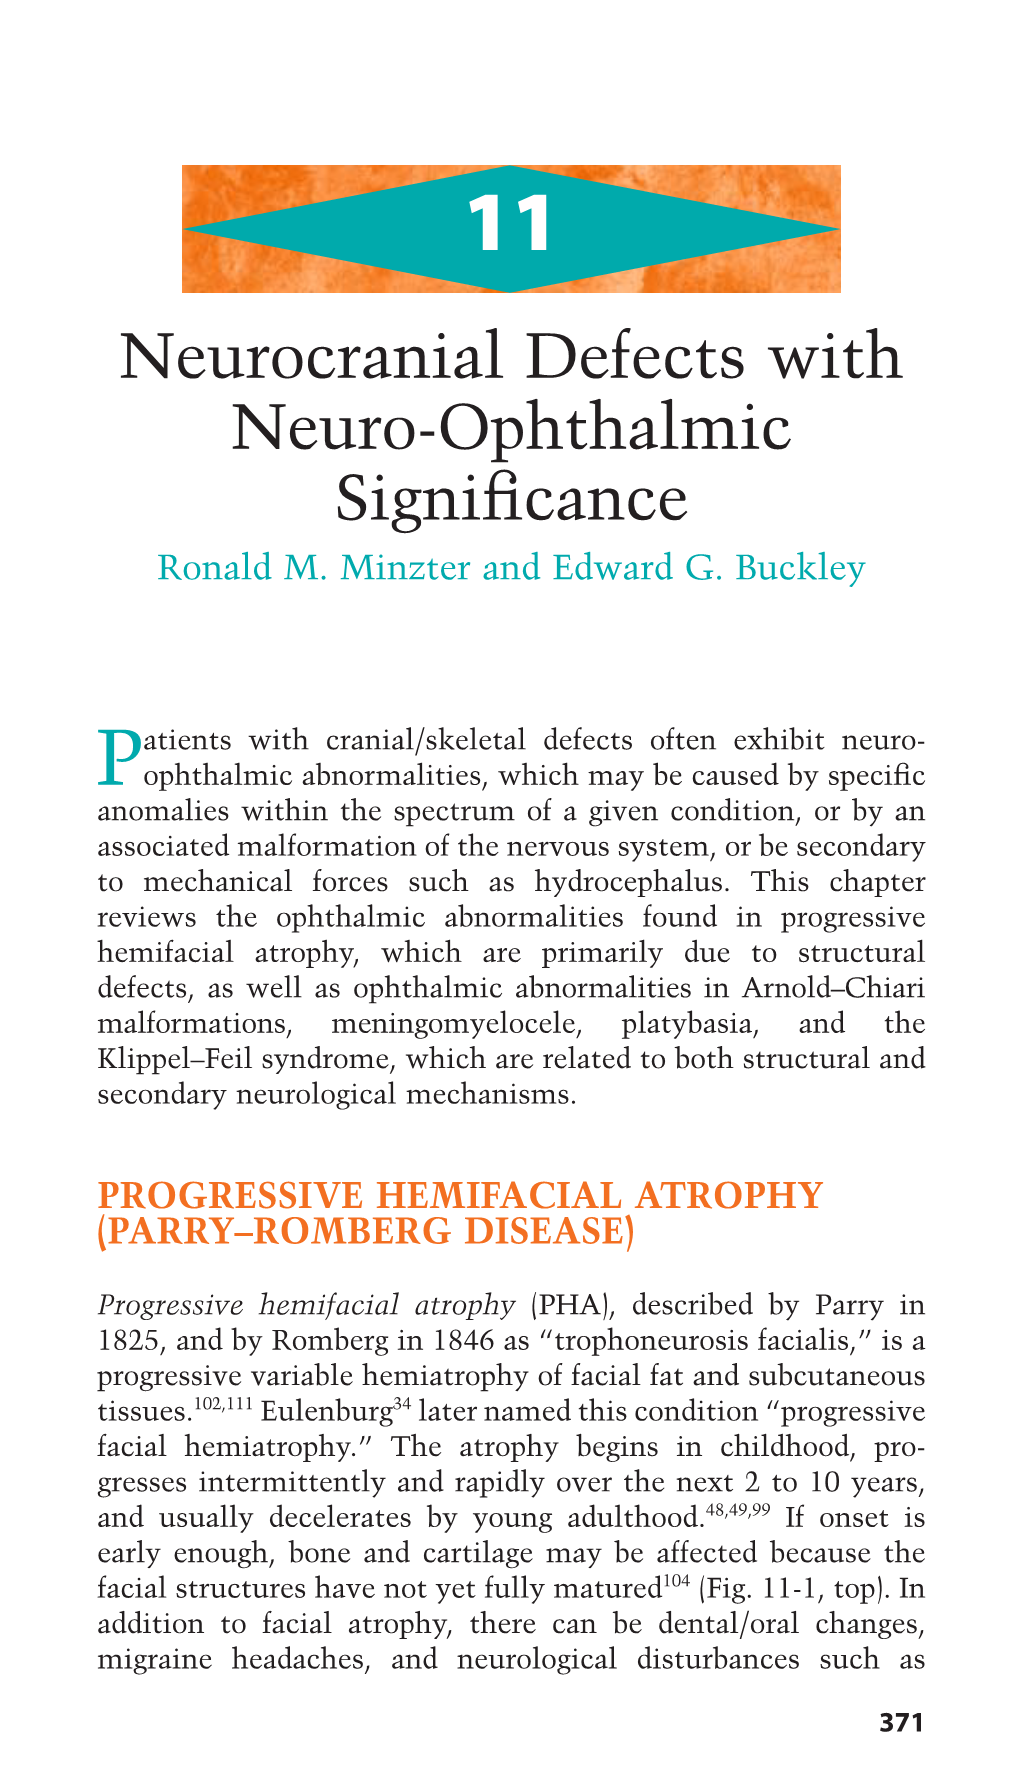 Neurocranial Defects with Neuro-Ophthalmic Significance